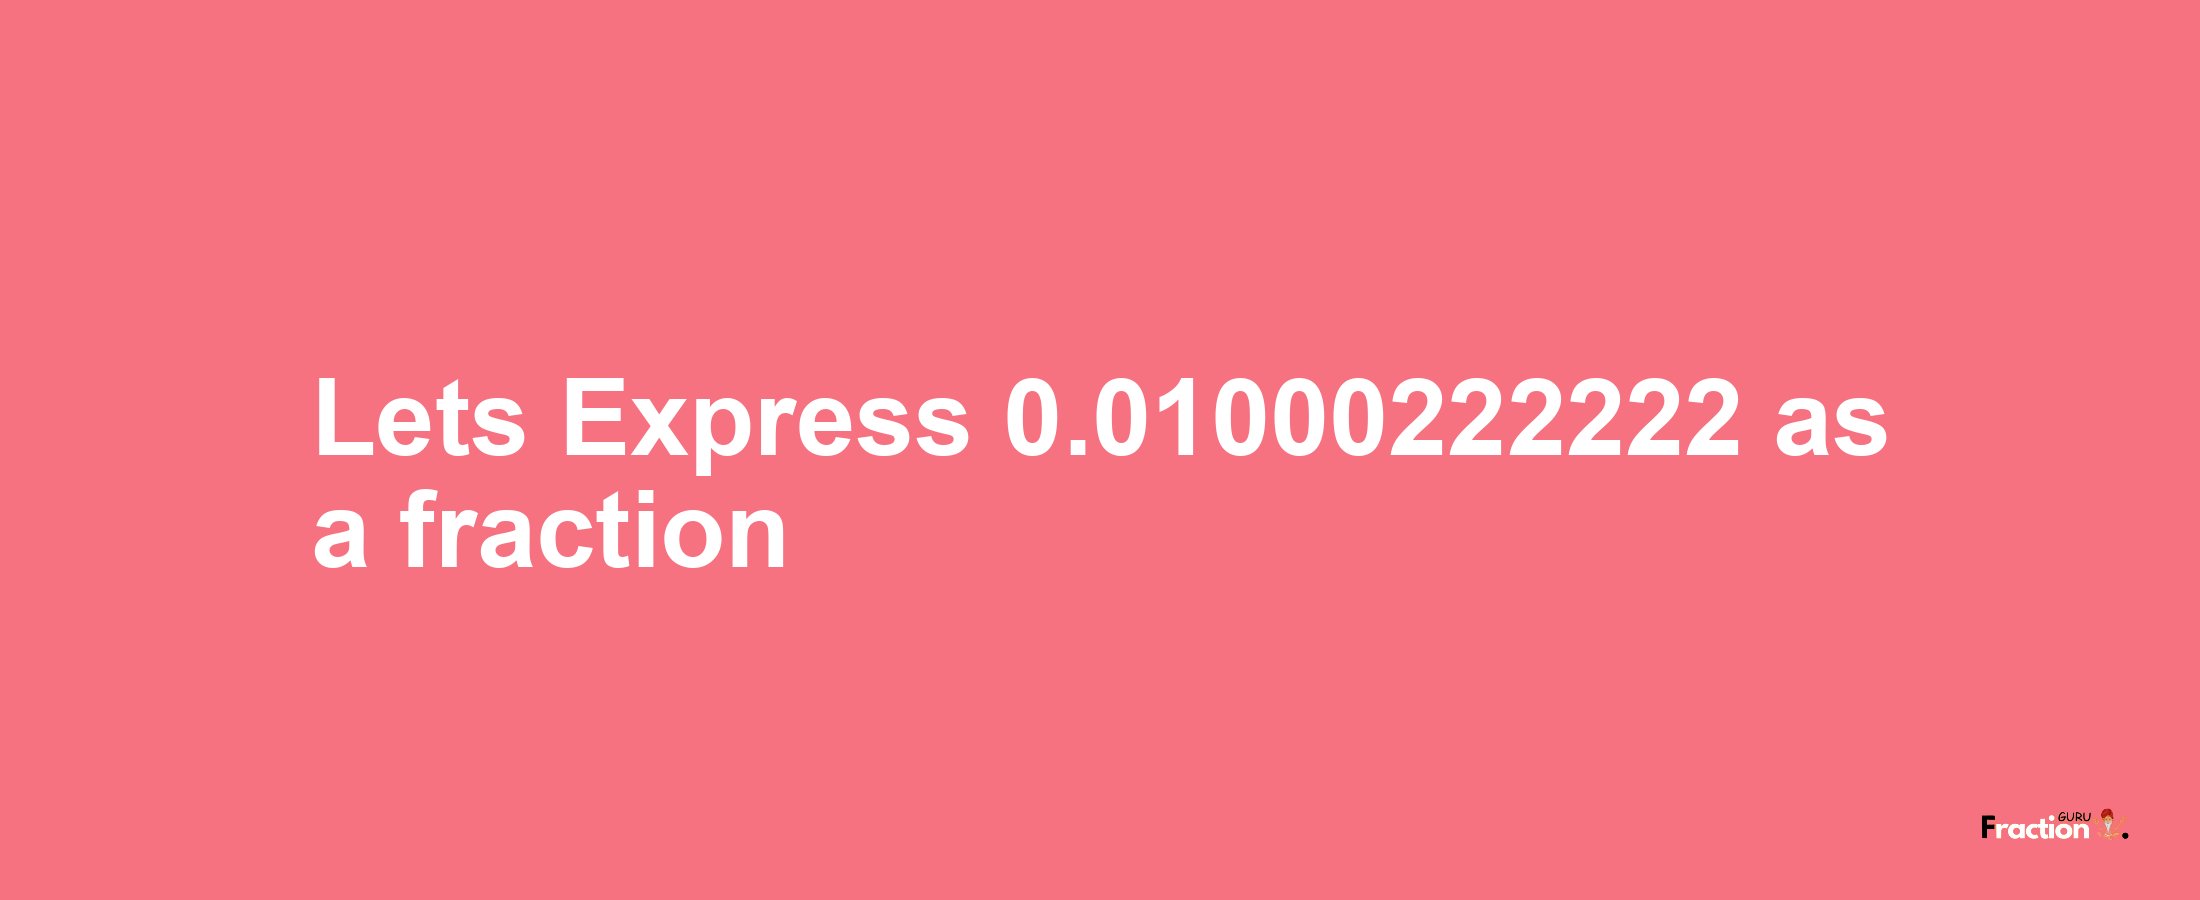 Lets Express 0.01000222222 as afraction